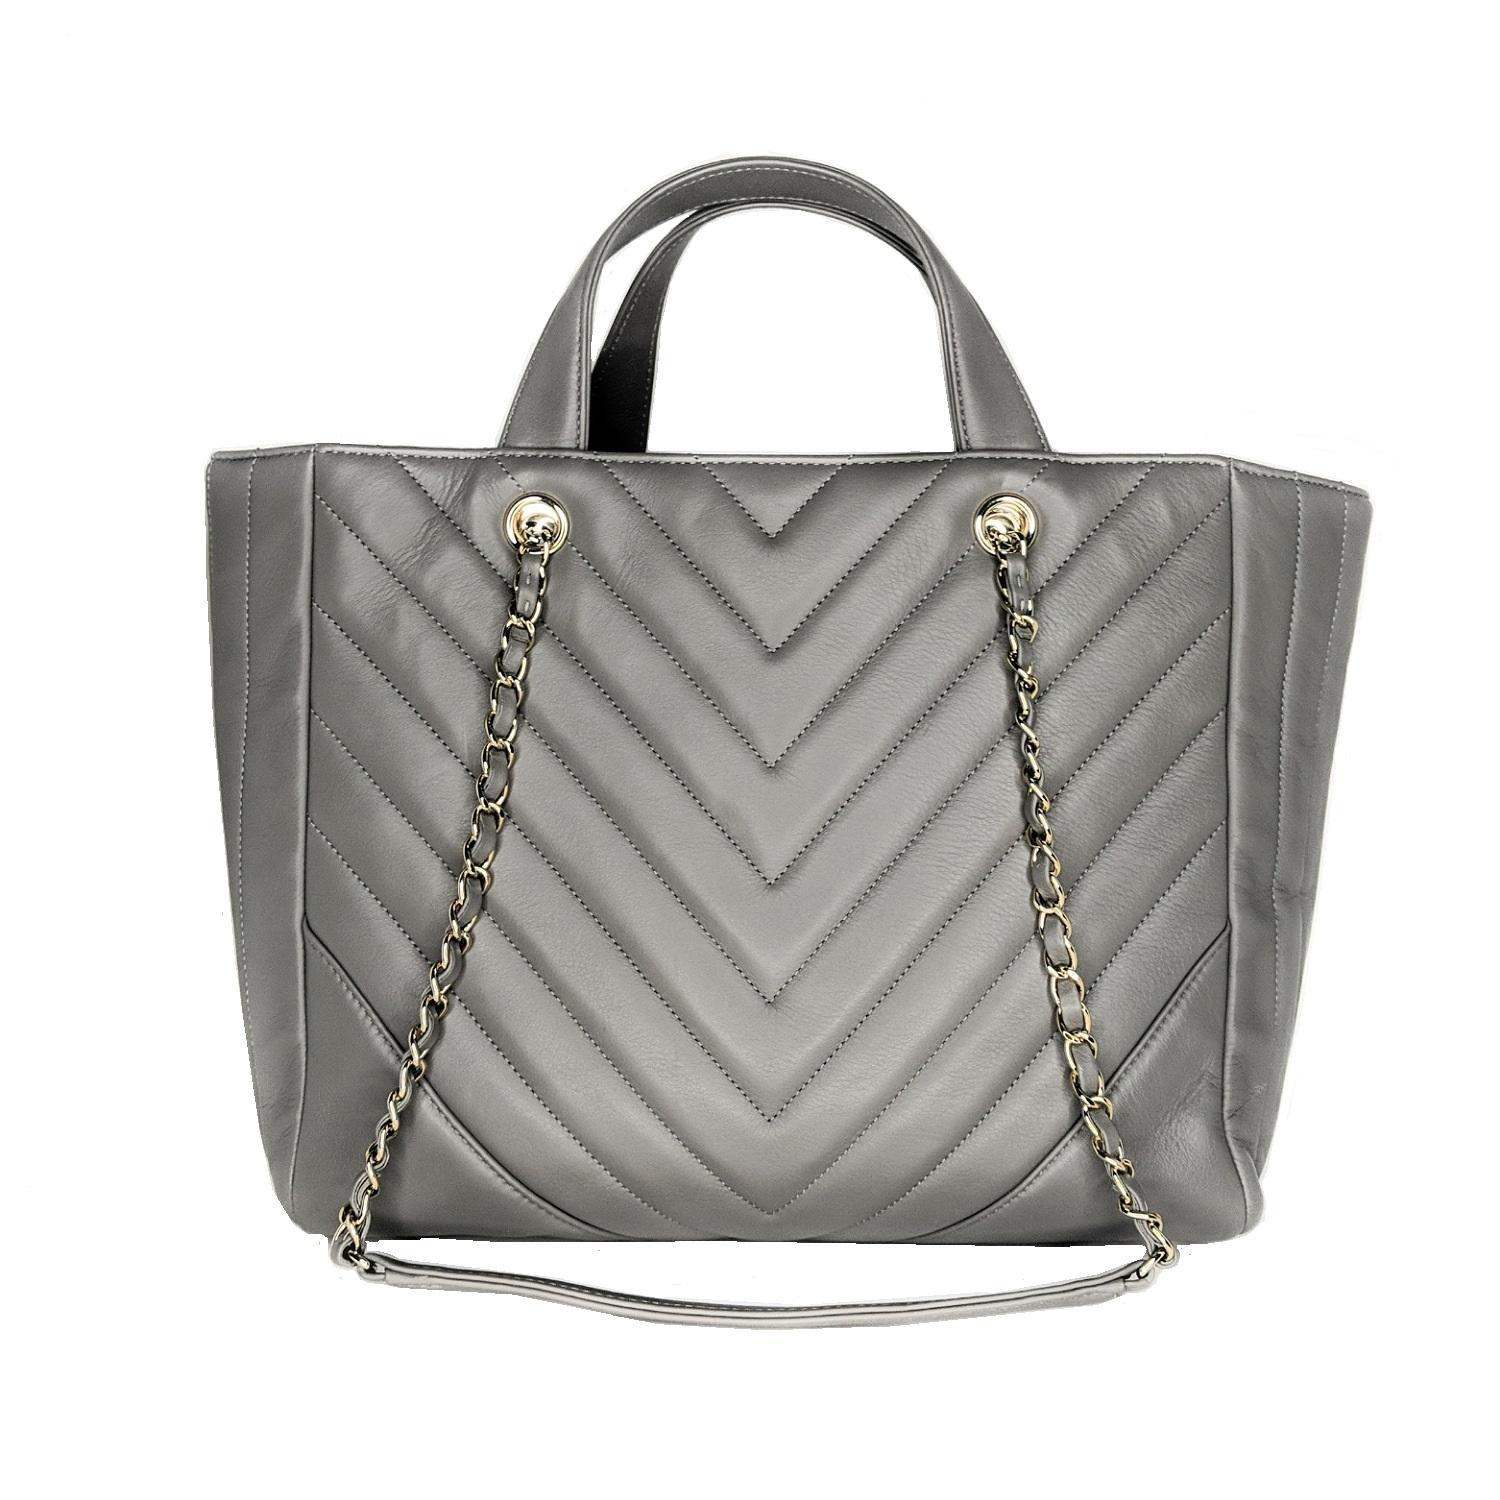 This stylish tote is beautifully crafted of chevron-quilted calfskin leather in Grey. The shoulder bag features polished gold-tone chain link leather threaded shoulder straps with leather shoulder pads and leather top strap handles. The top opens